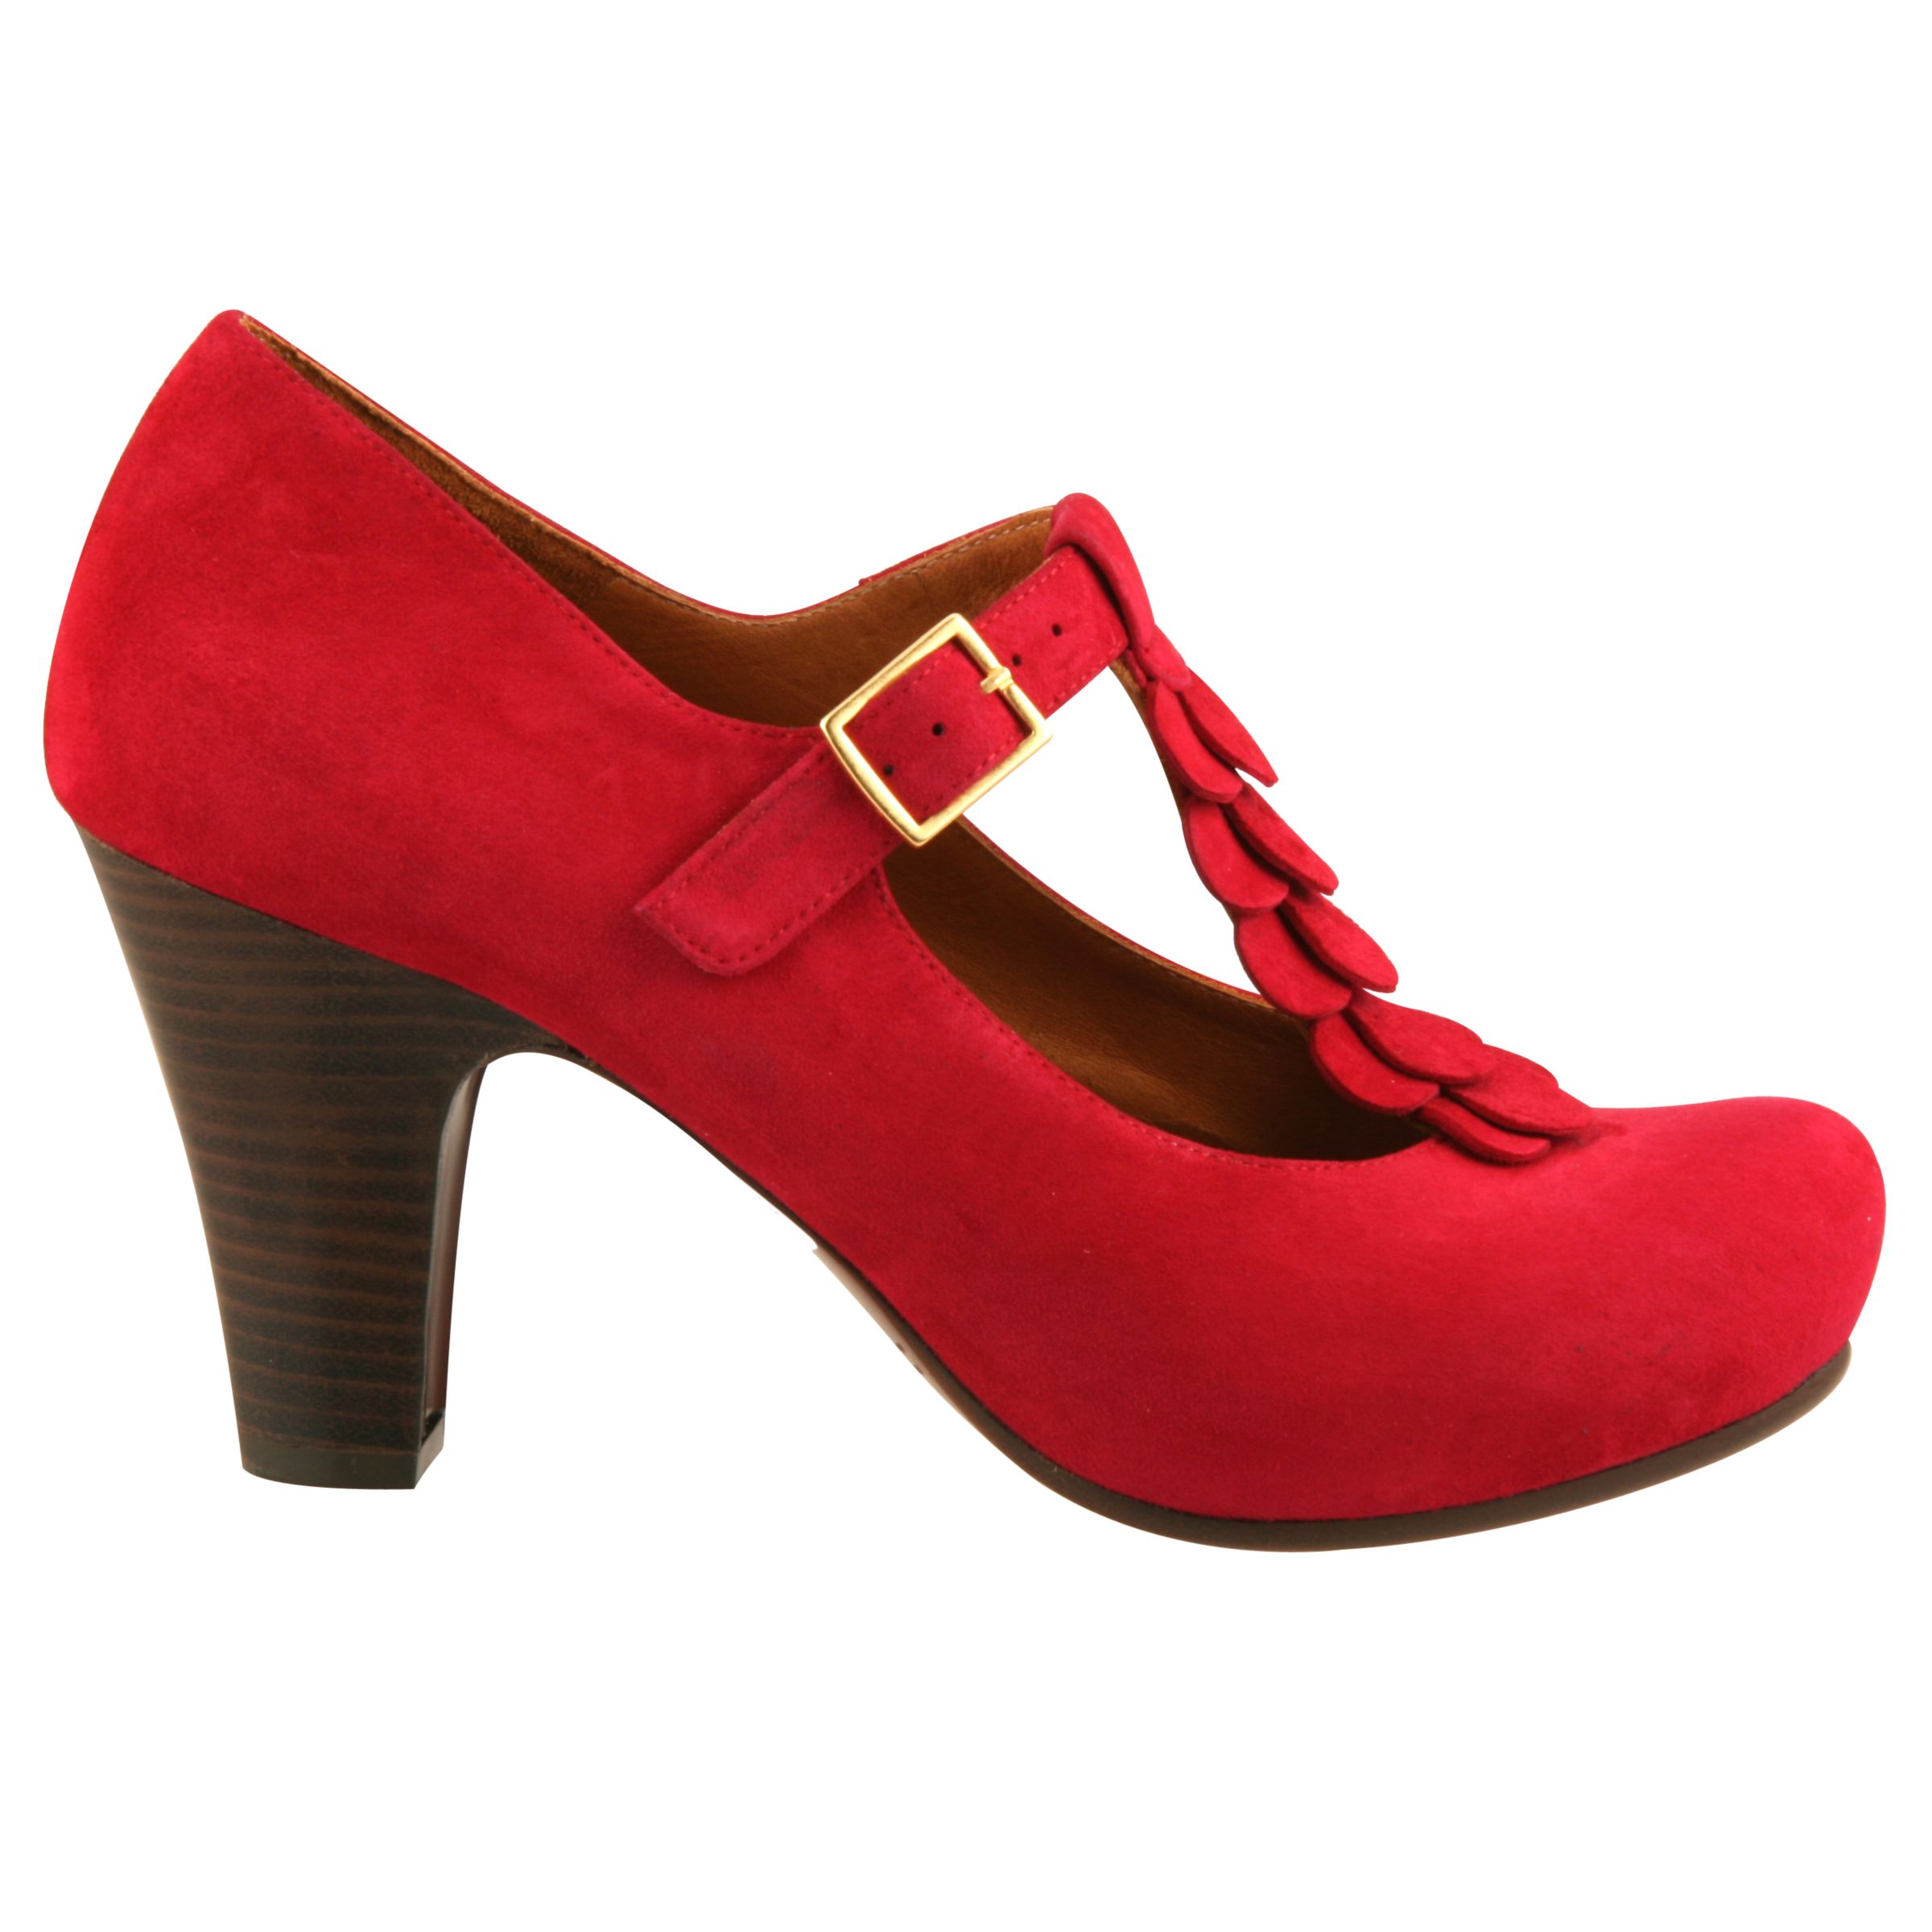 Chie Mihara Cora T-Bar Suede Court Shoes, Fuchsia at John Lewis